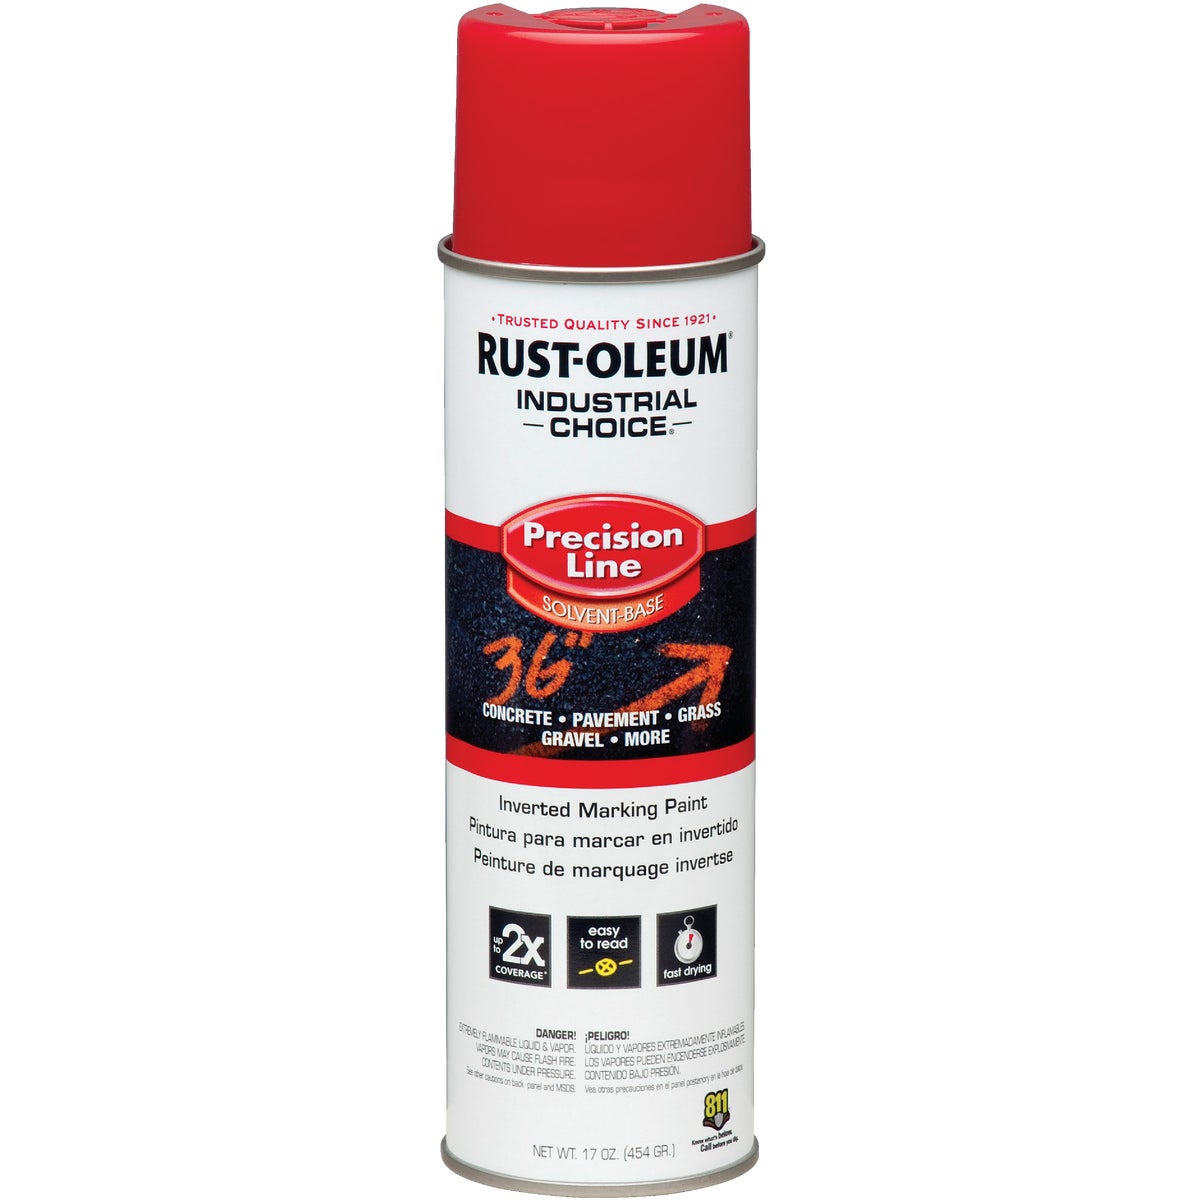 Rust-Oleum Industrial Choice Red 17 Oz. Inverted Marking Spray Paint